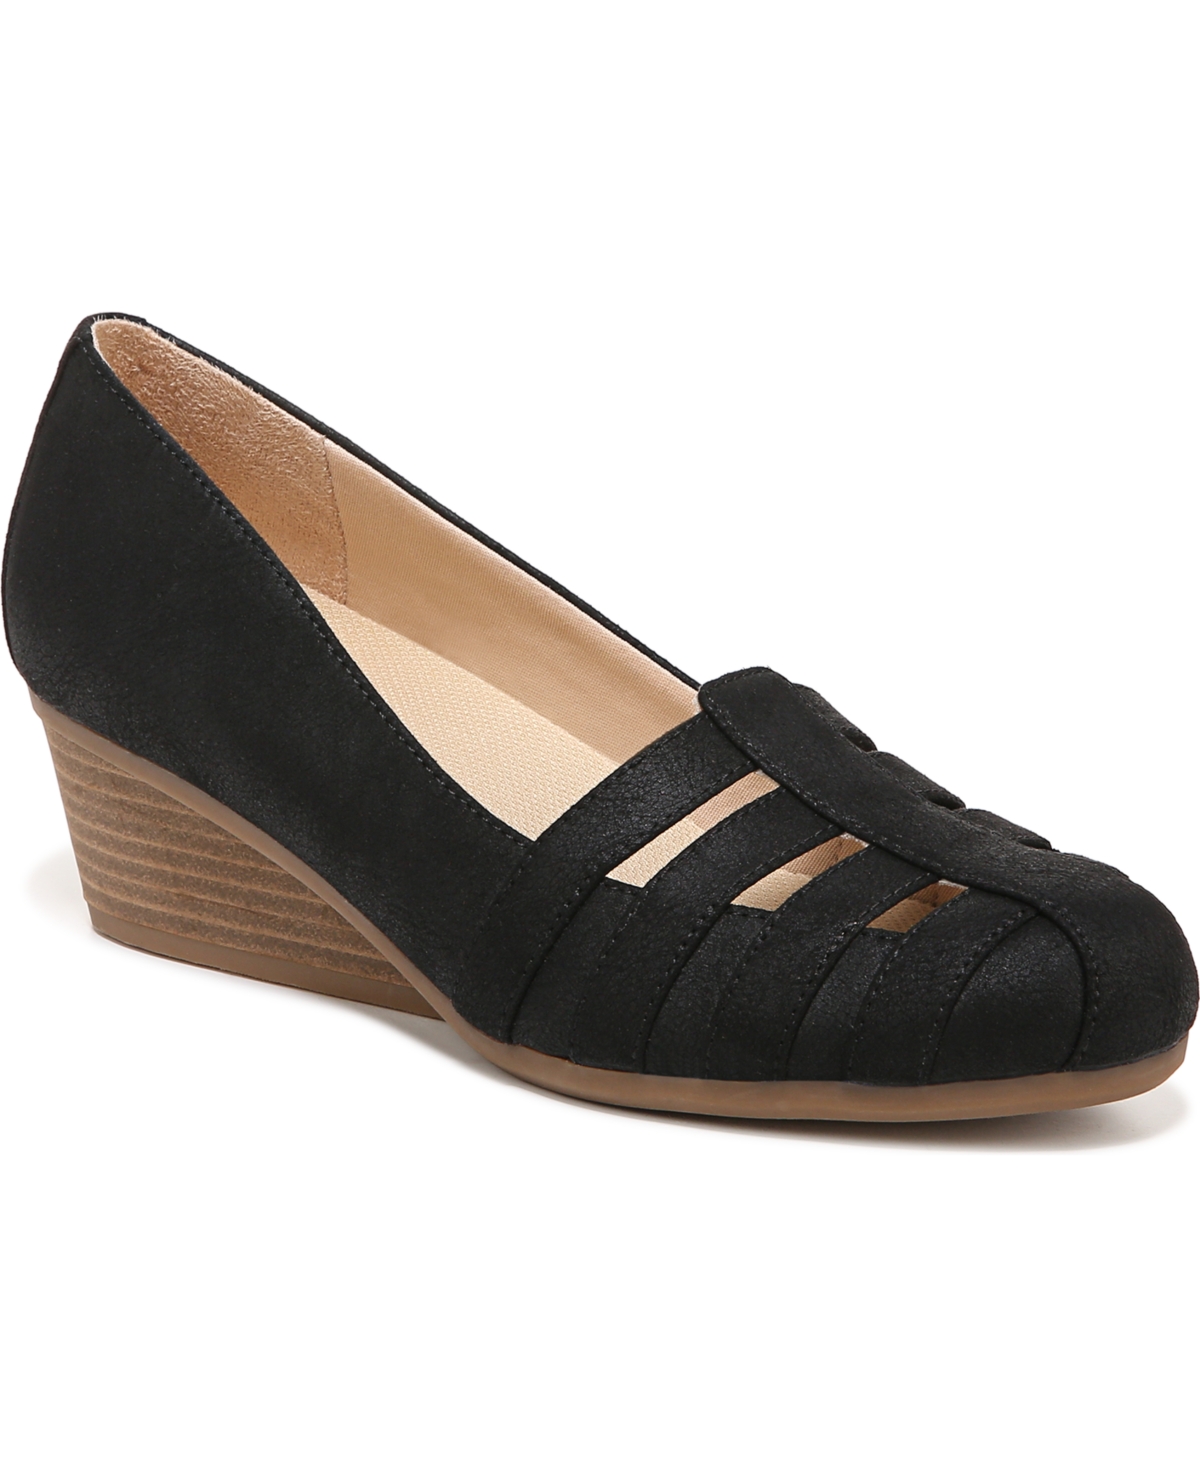 Dr. Scholl's Be Free Wedge Pump In Black Fabric